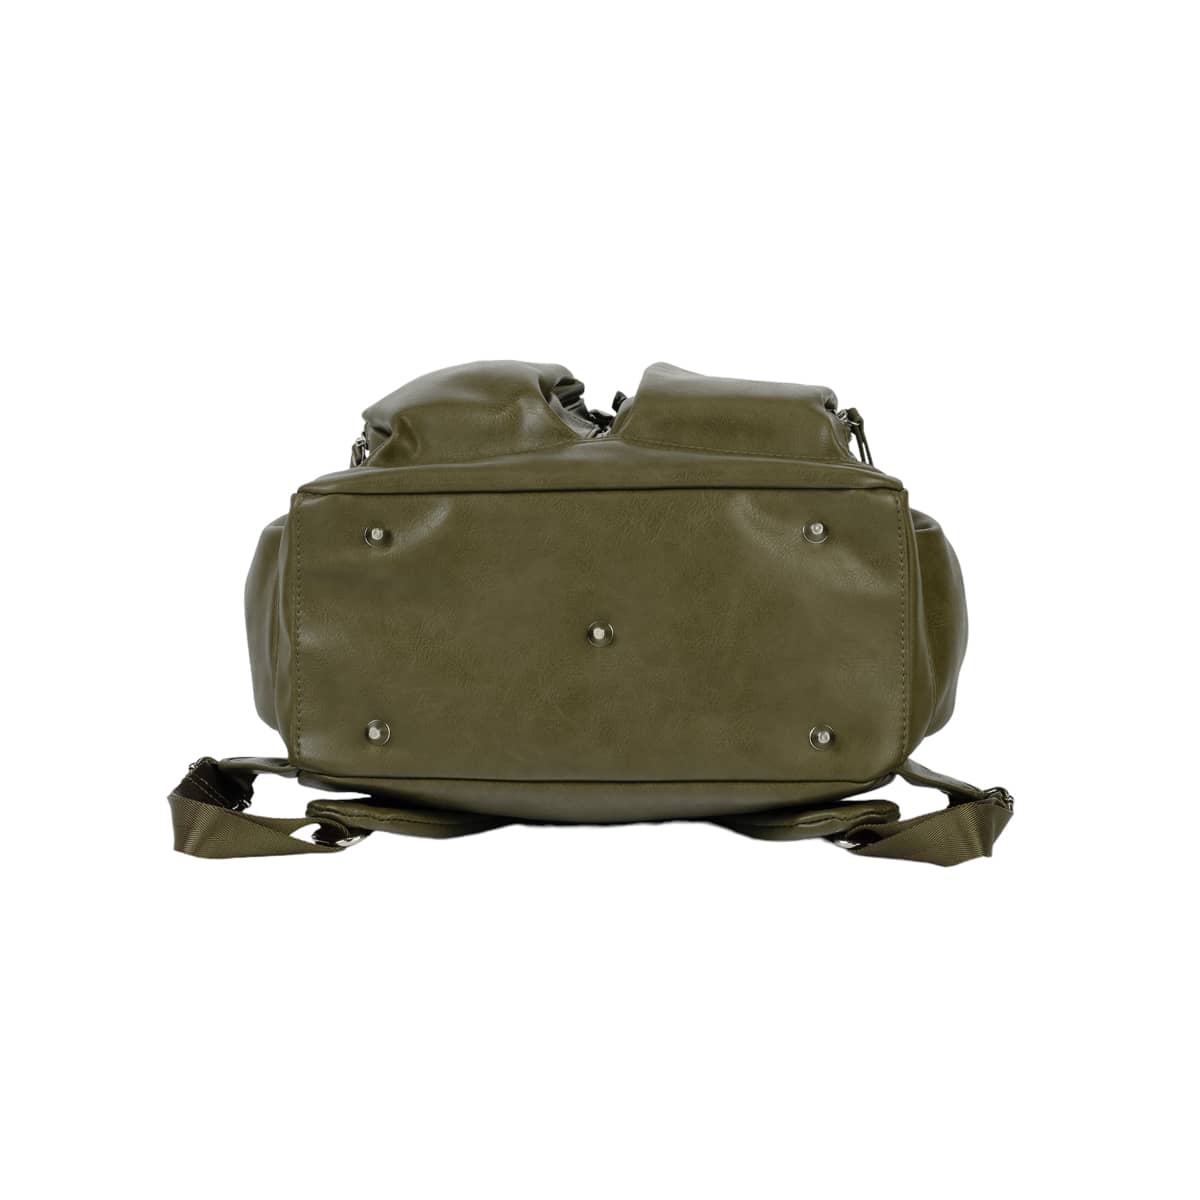 OiOi Faux Leather Nappy Backpack - Olive